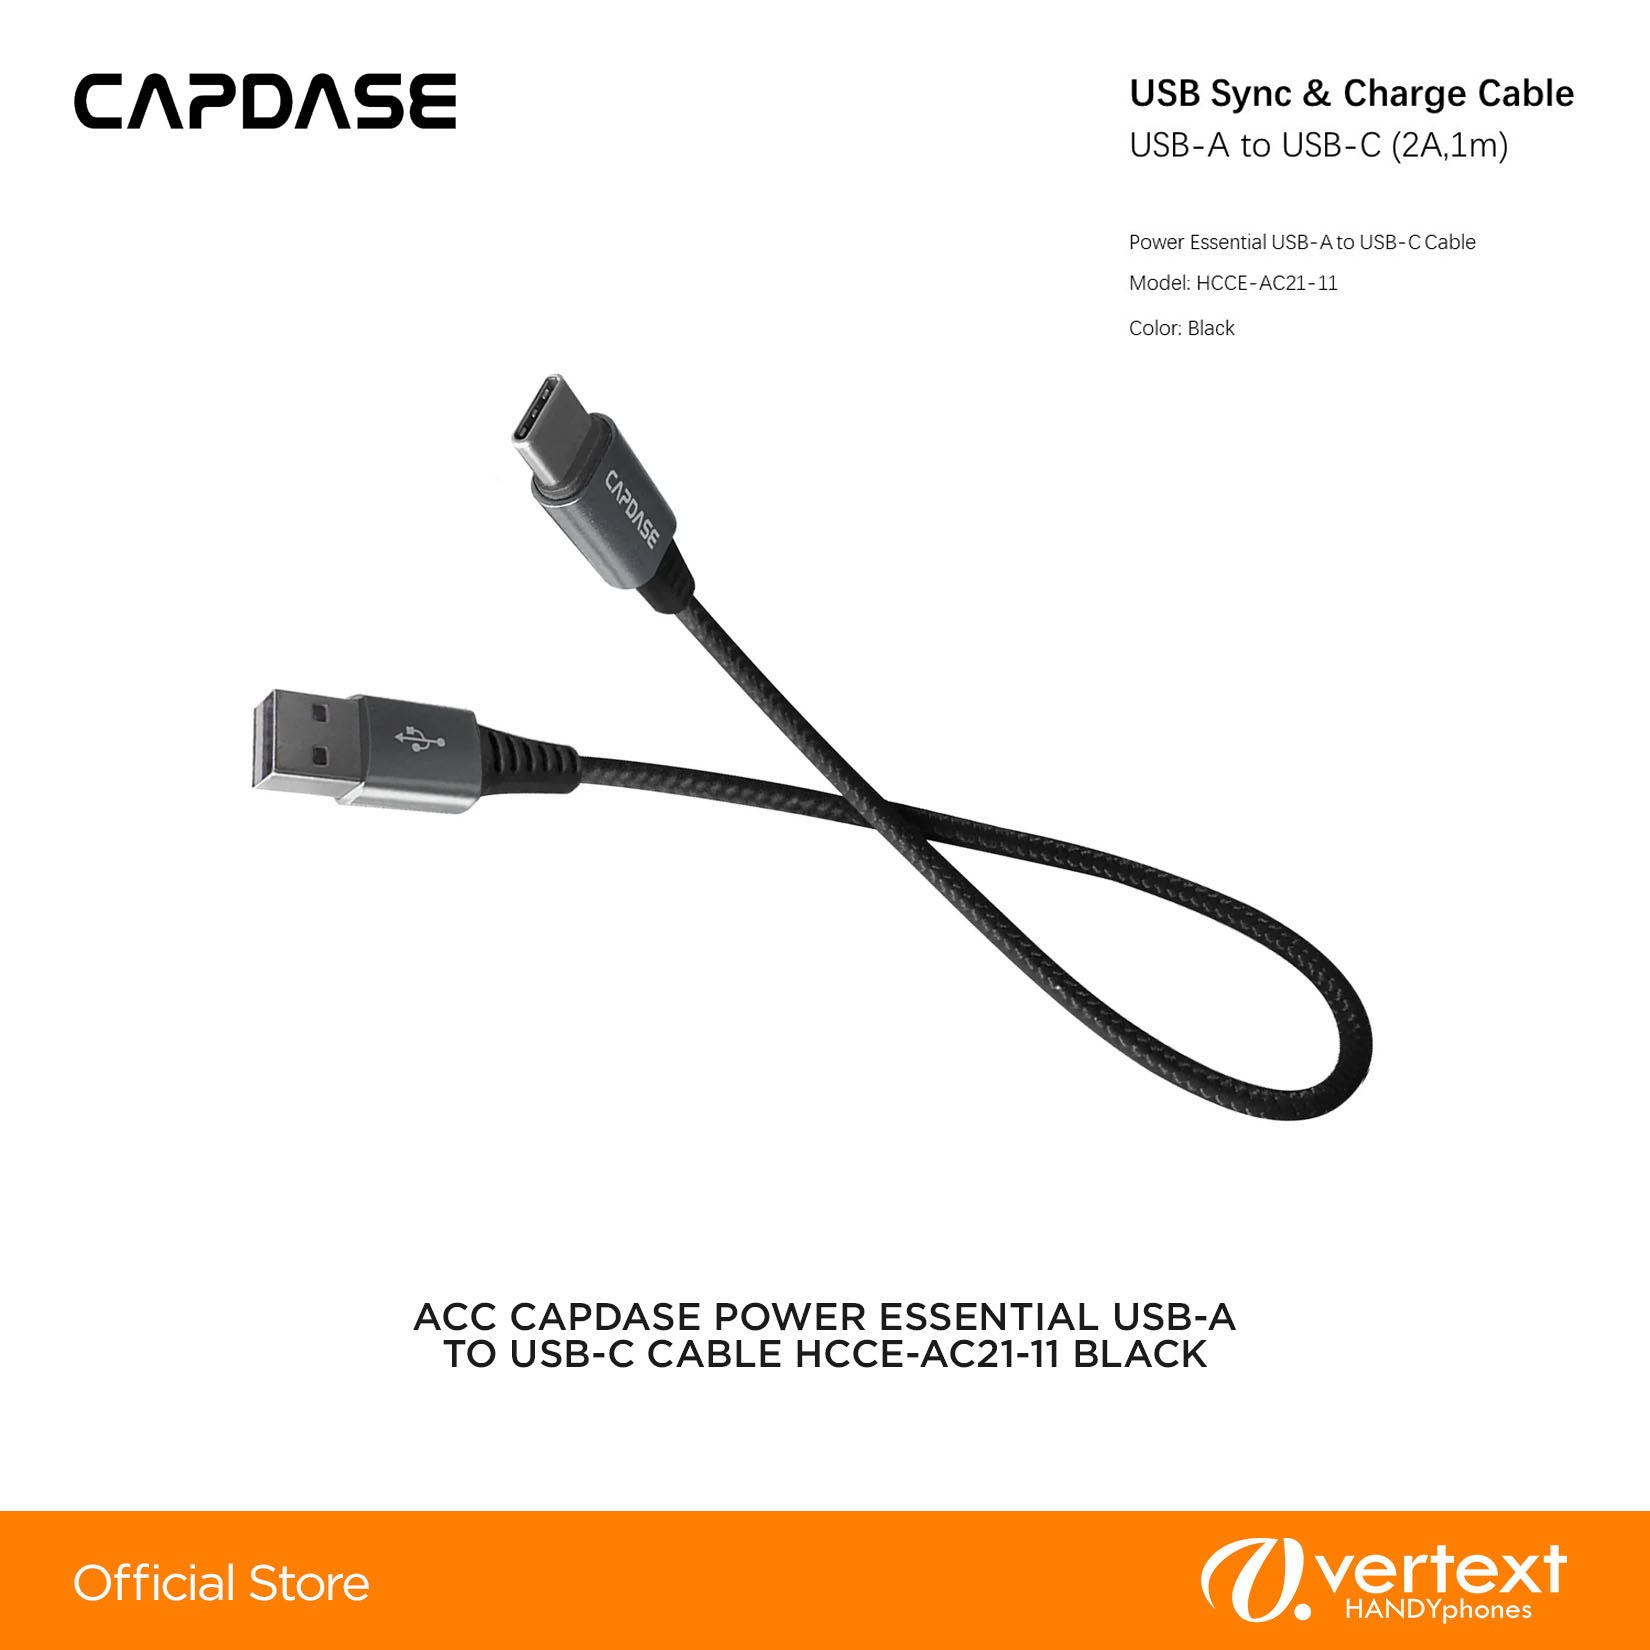 Capdase POWER ESSENTIAL USB-A TO USB-C CABLE HCCE-AC21-11